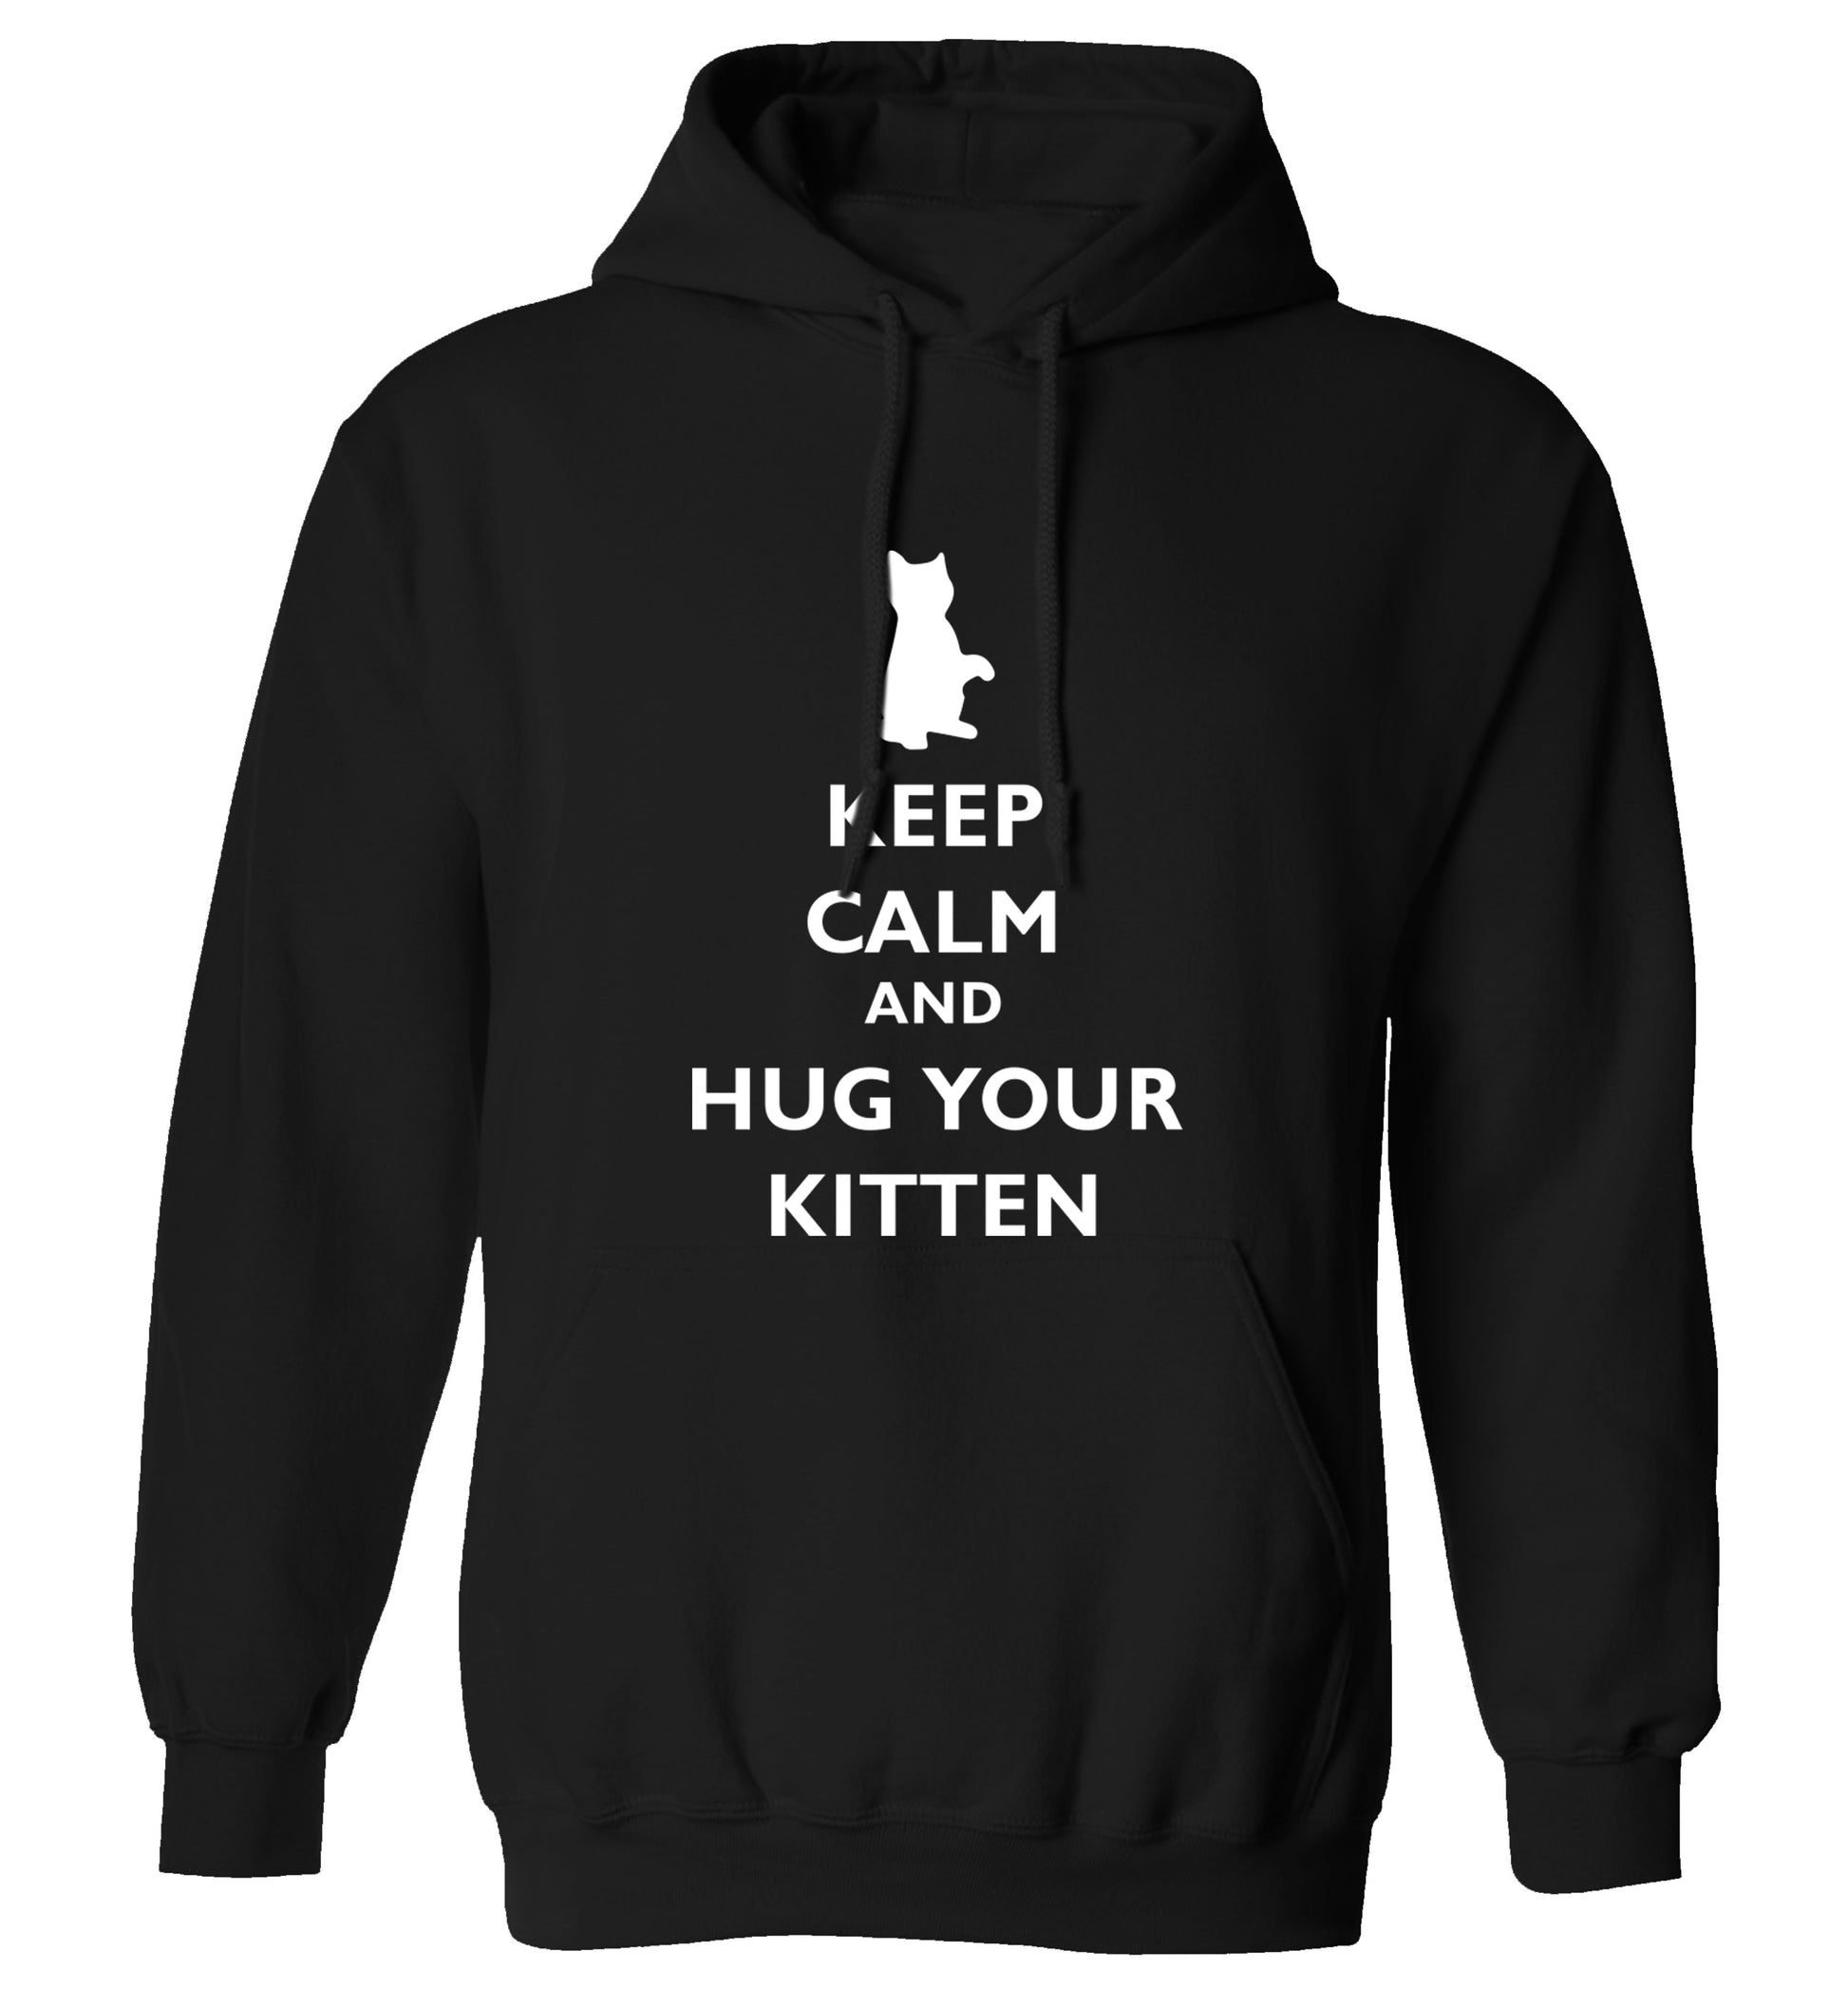 Keep calm and hug your kitten adults unisex black hoodie 2XL